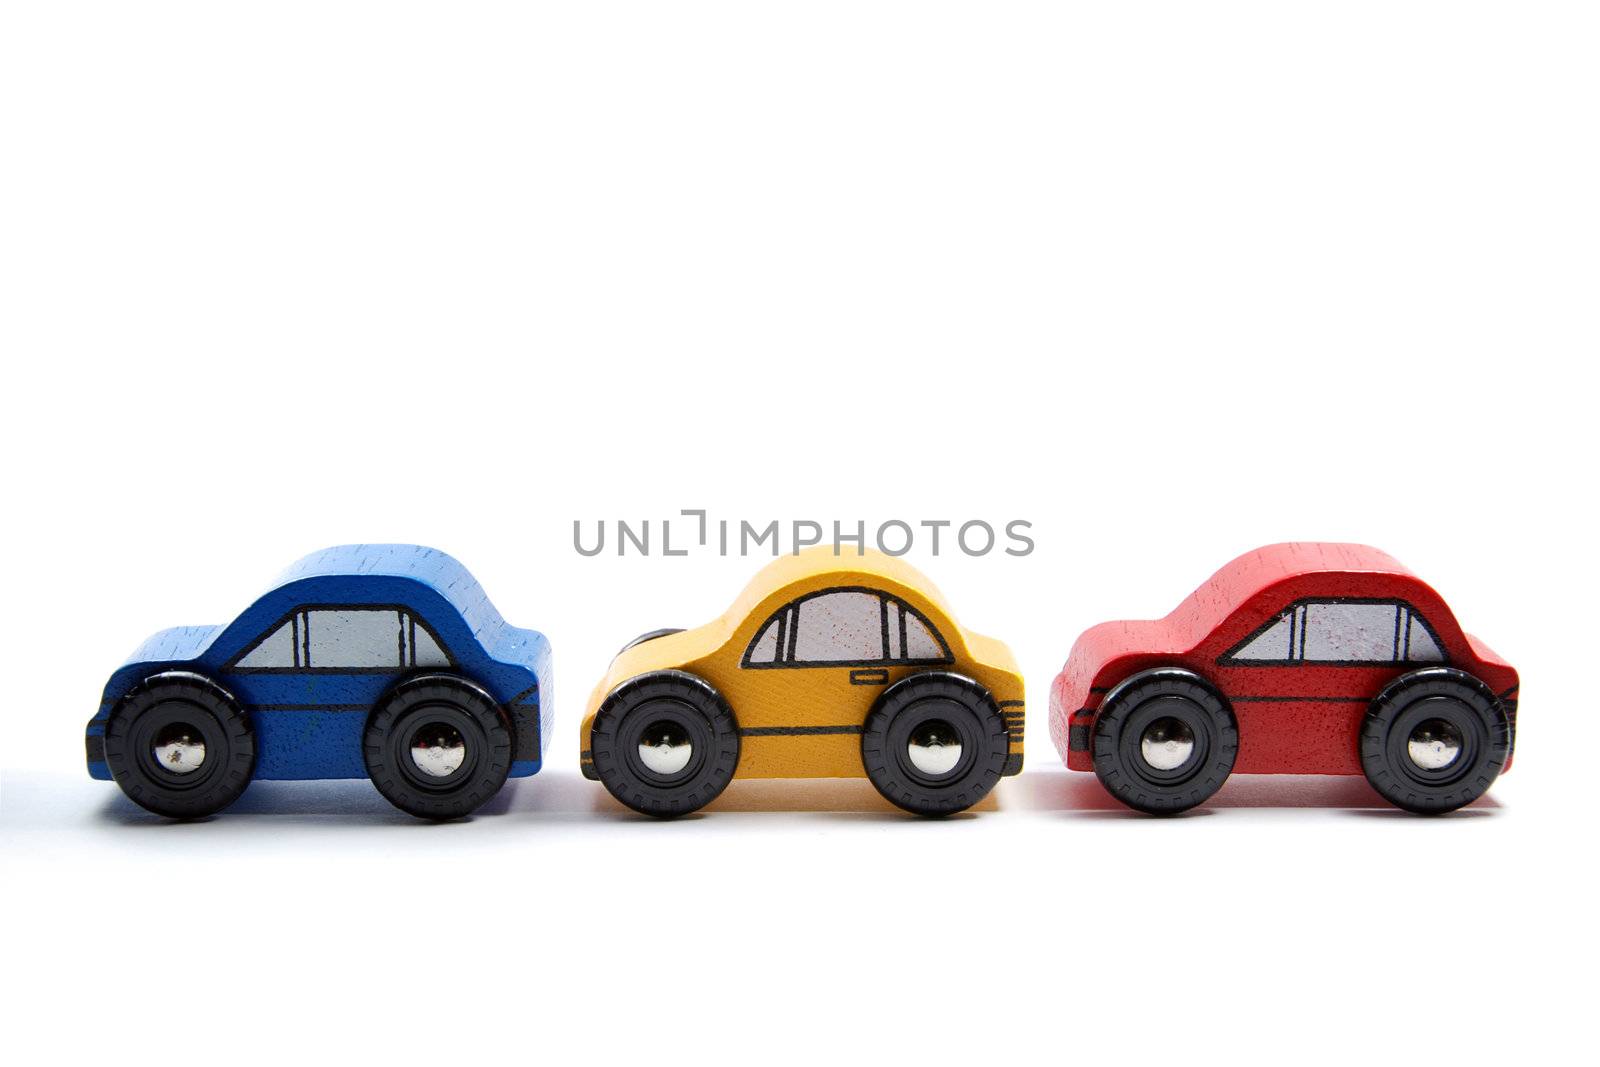 Three wooden toy cars in a row by Gjermund